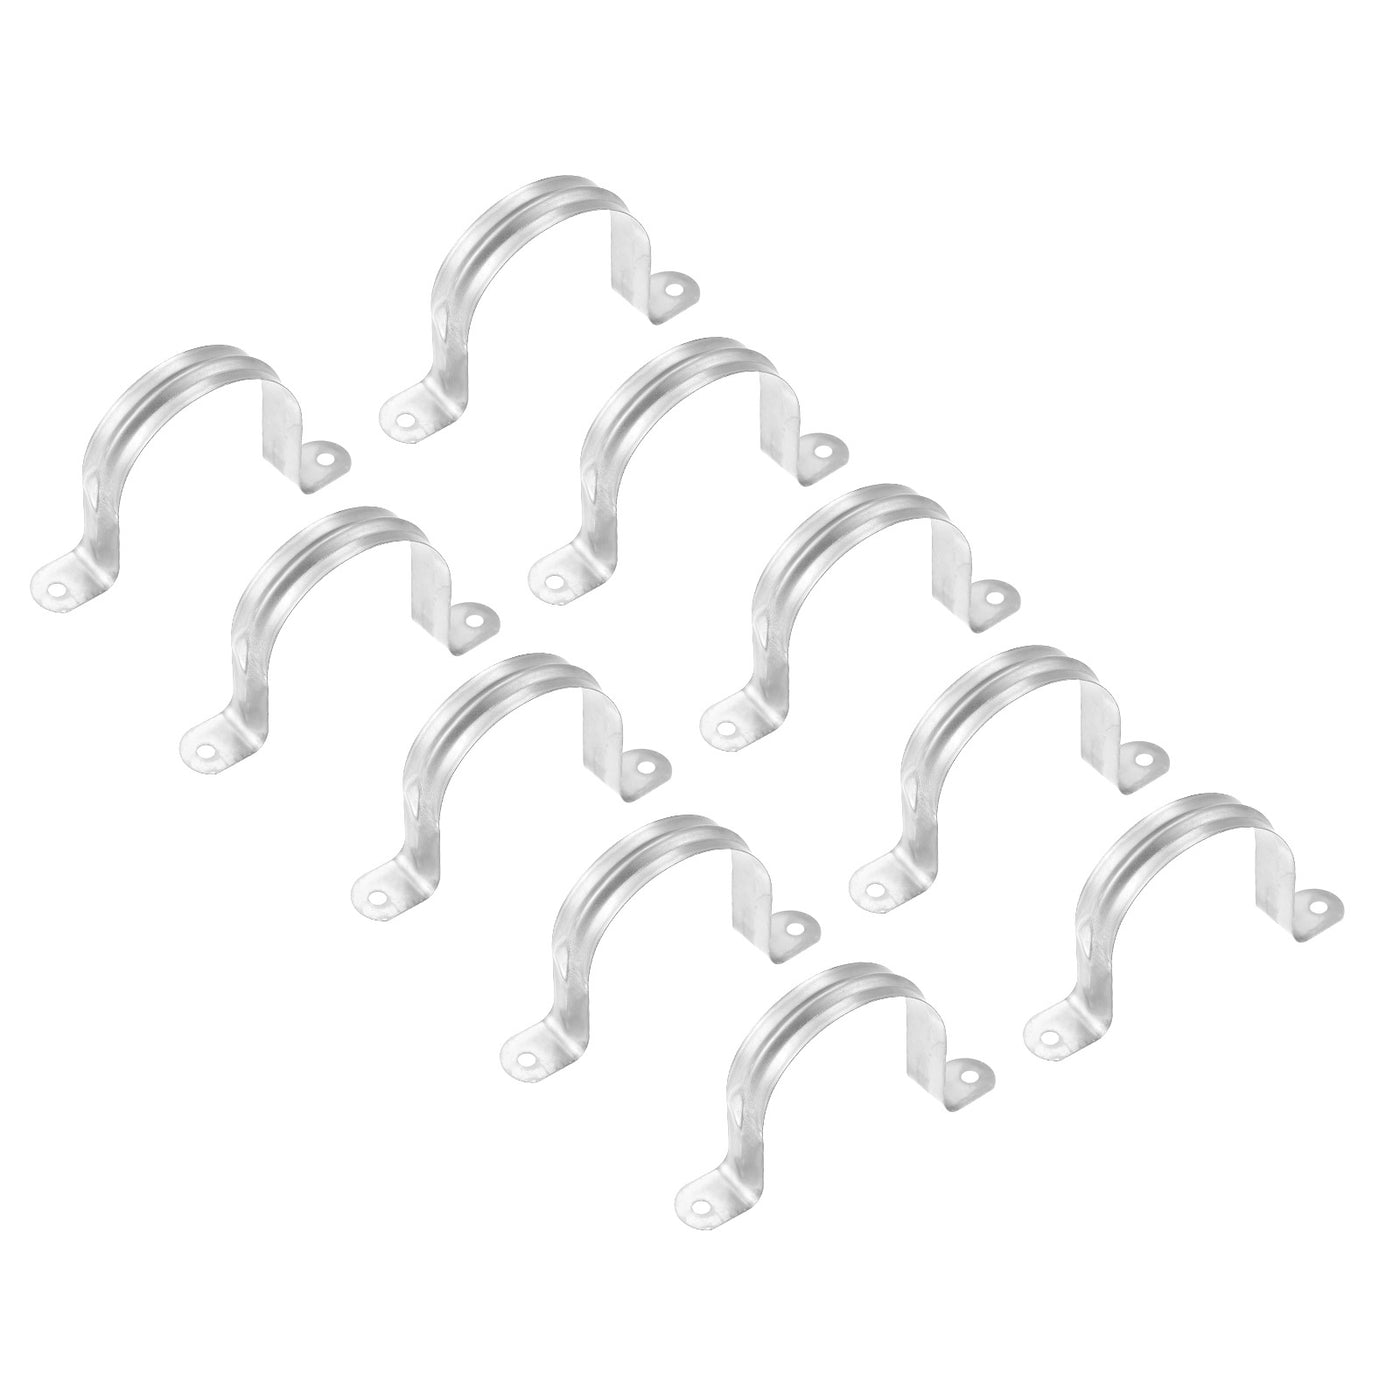 uxcell Uxcell Rigid Pipe Strap 16pcs 3" (75mm) Carbon Steel U Bracket Tension Tube Clamp